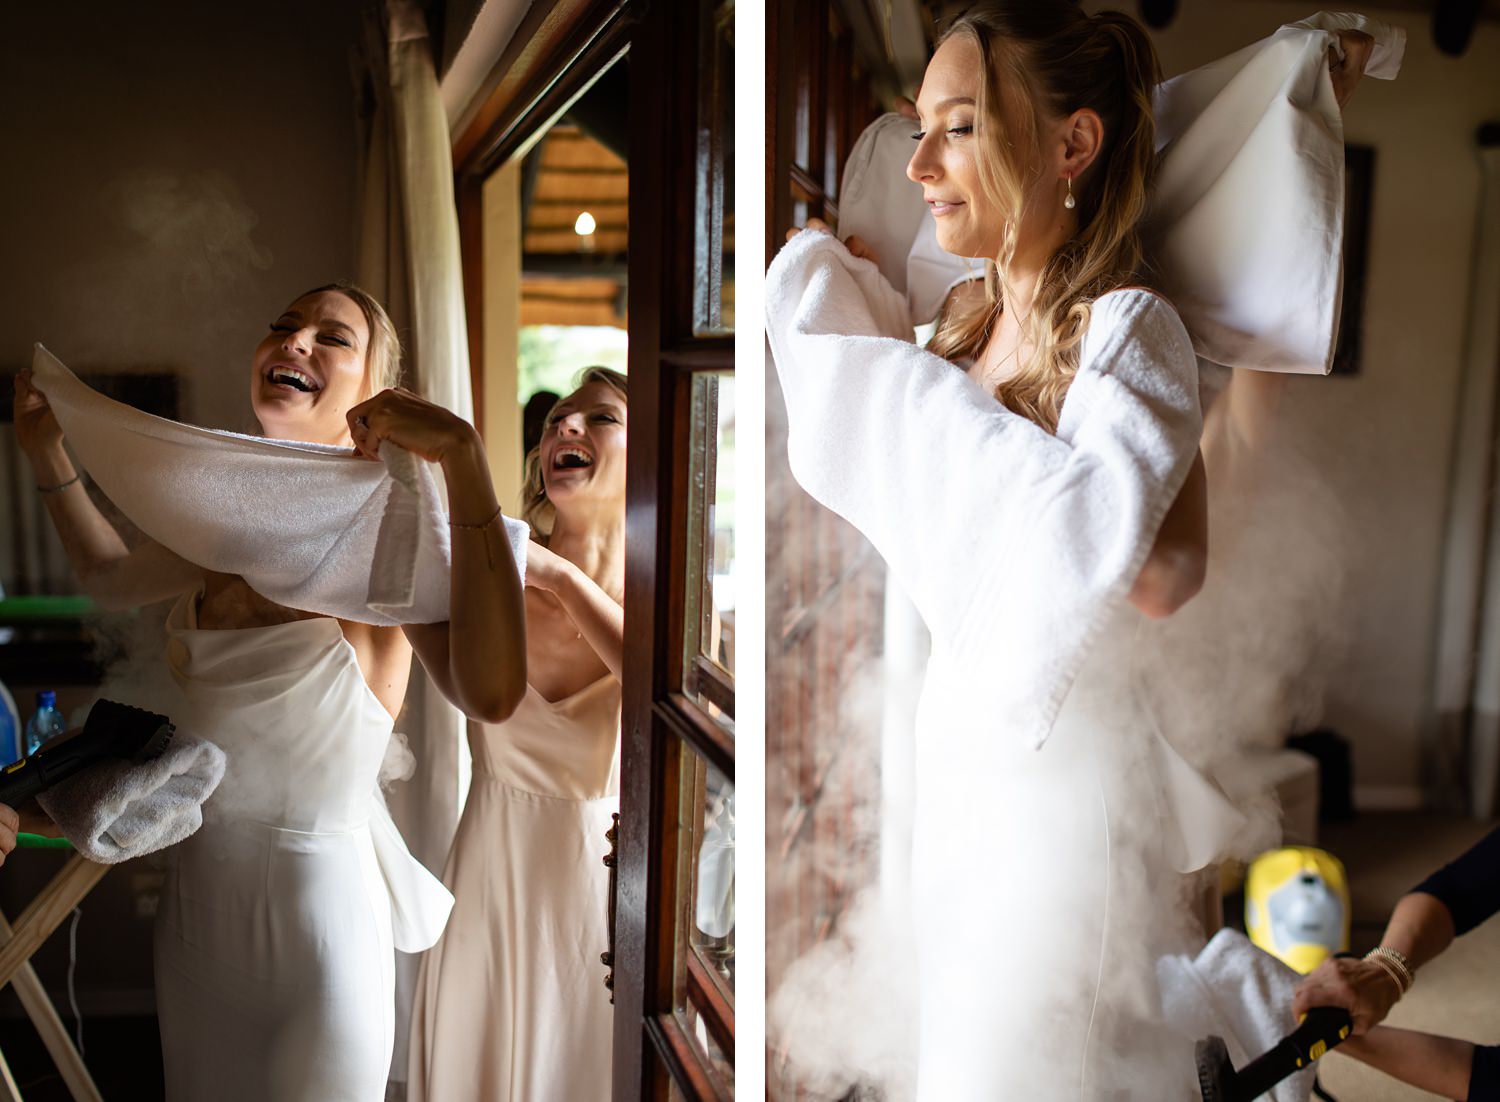 The bride has her dress steamed at her wedding in the Central Drakensberg